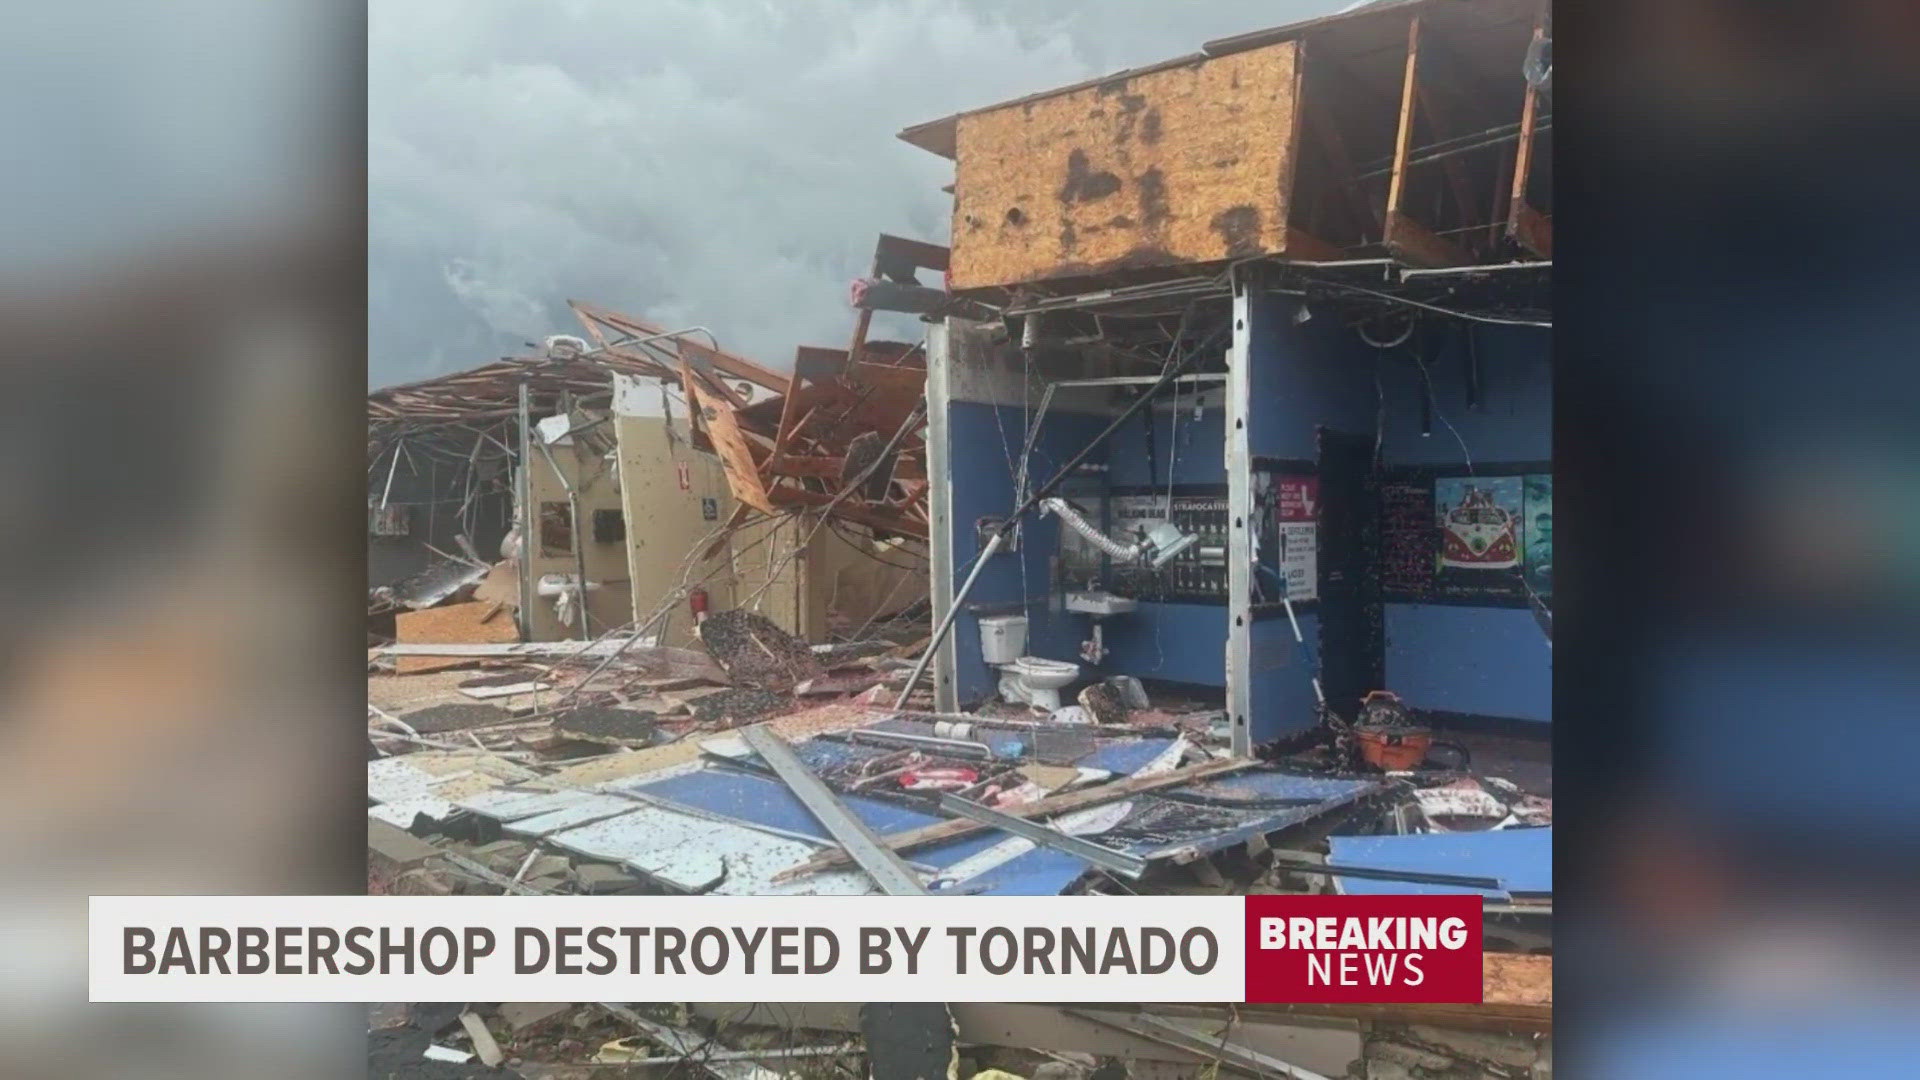 Jude's Barbershop in Portage was destroyed Tuesday as multiple tornadoes hit the Portage area.